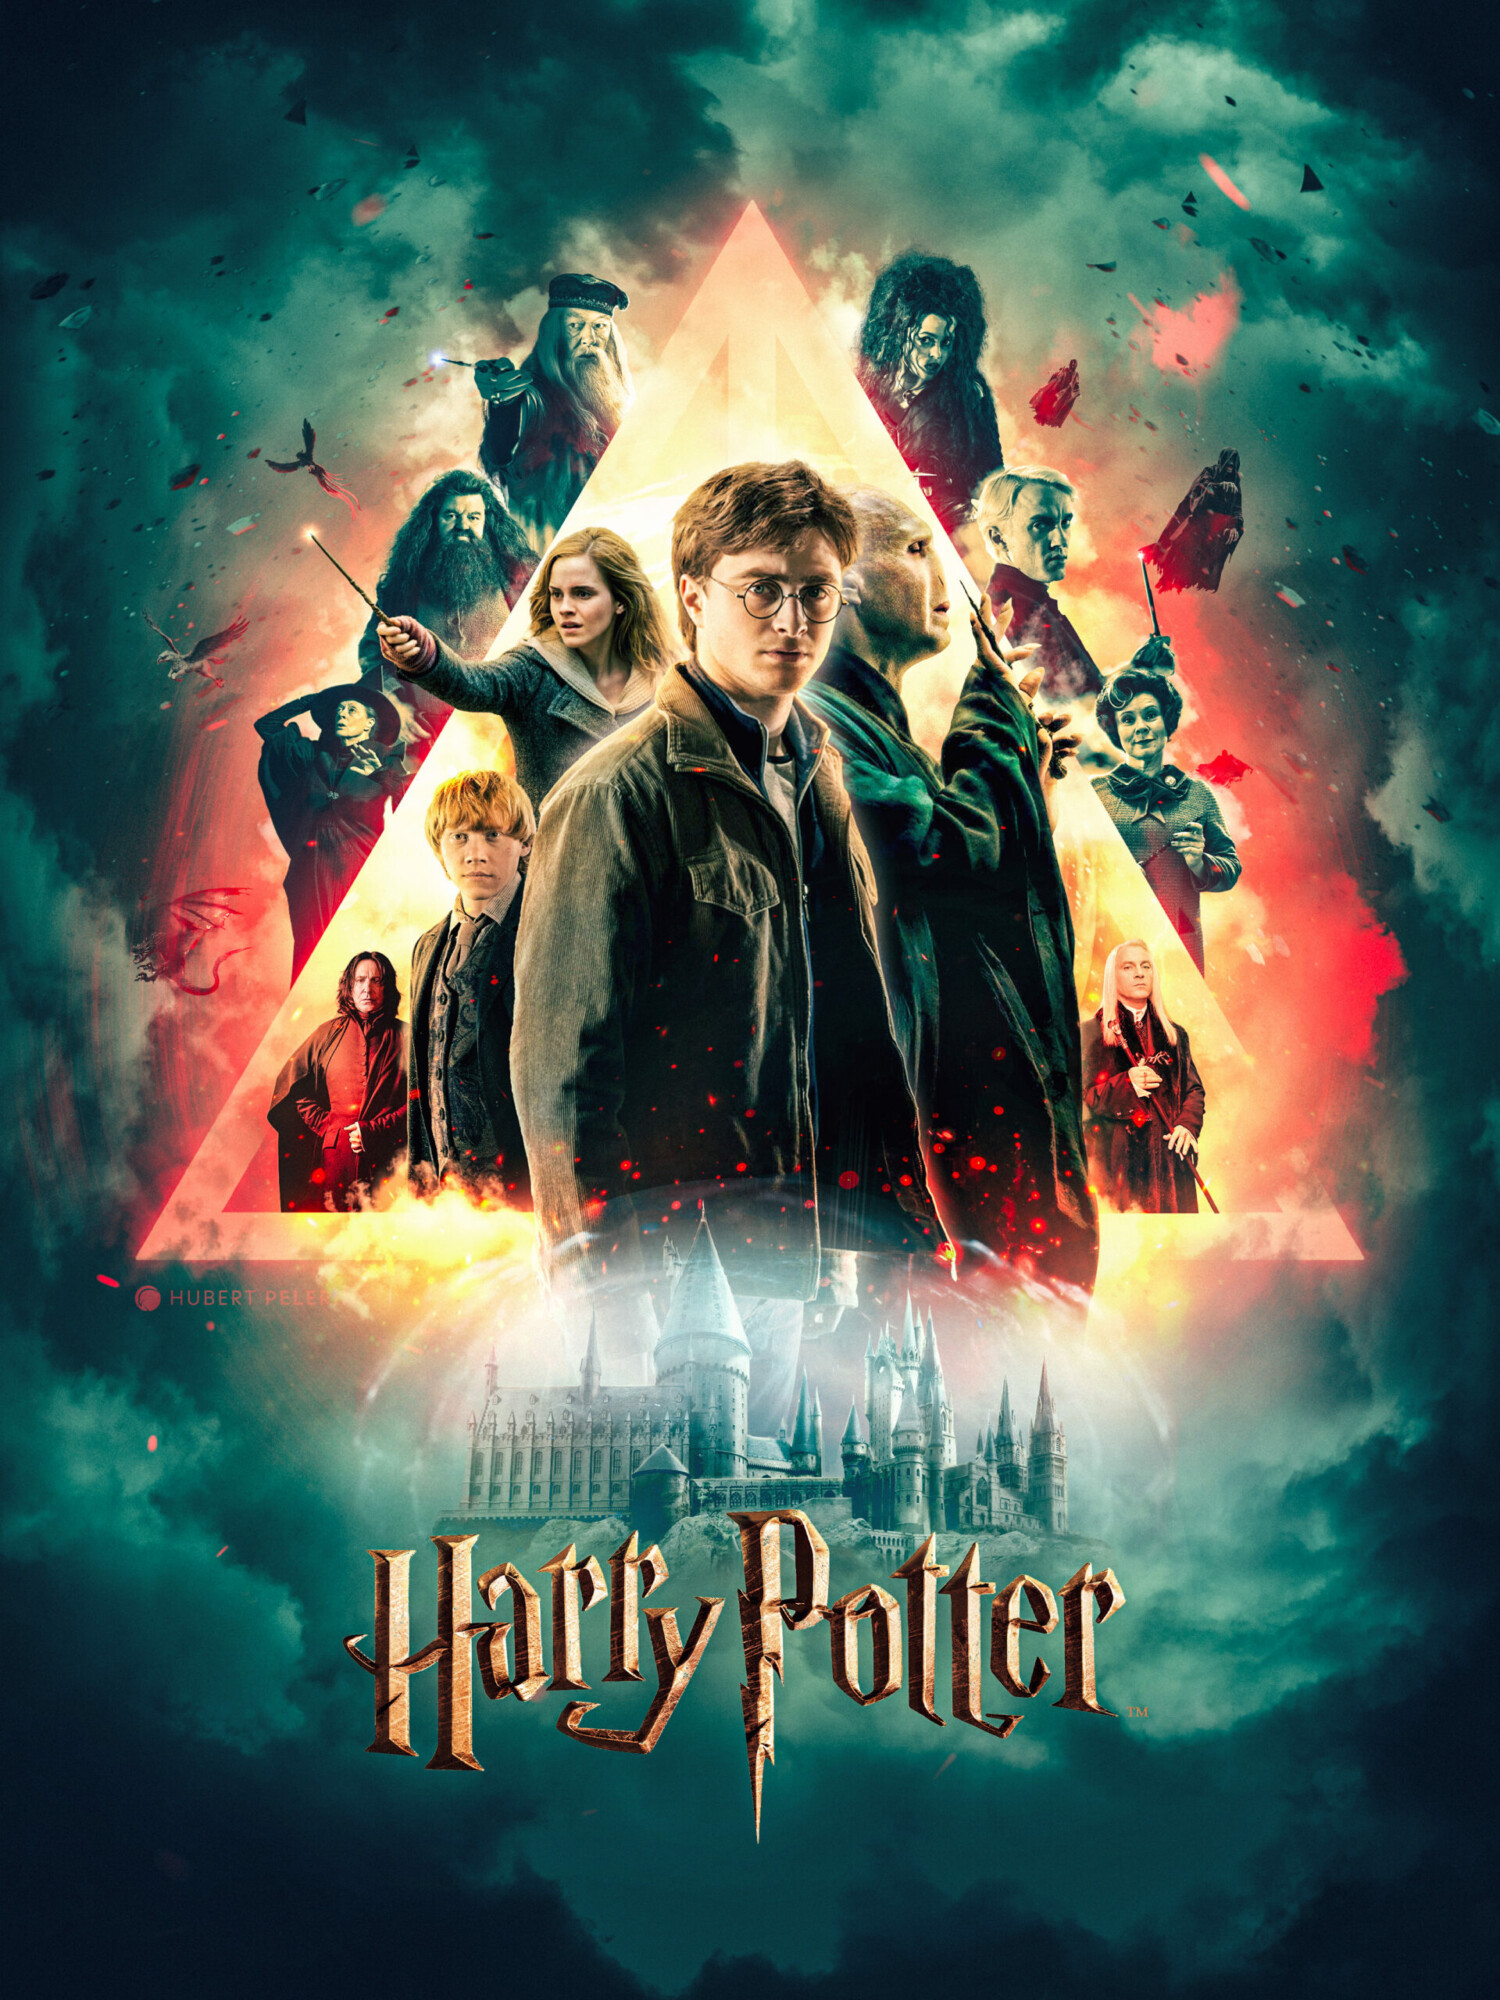 Harry Potter | Poster By Hubert